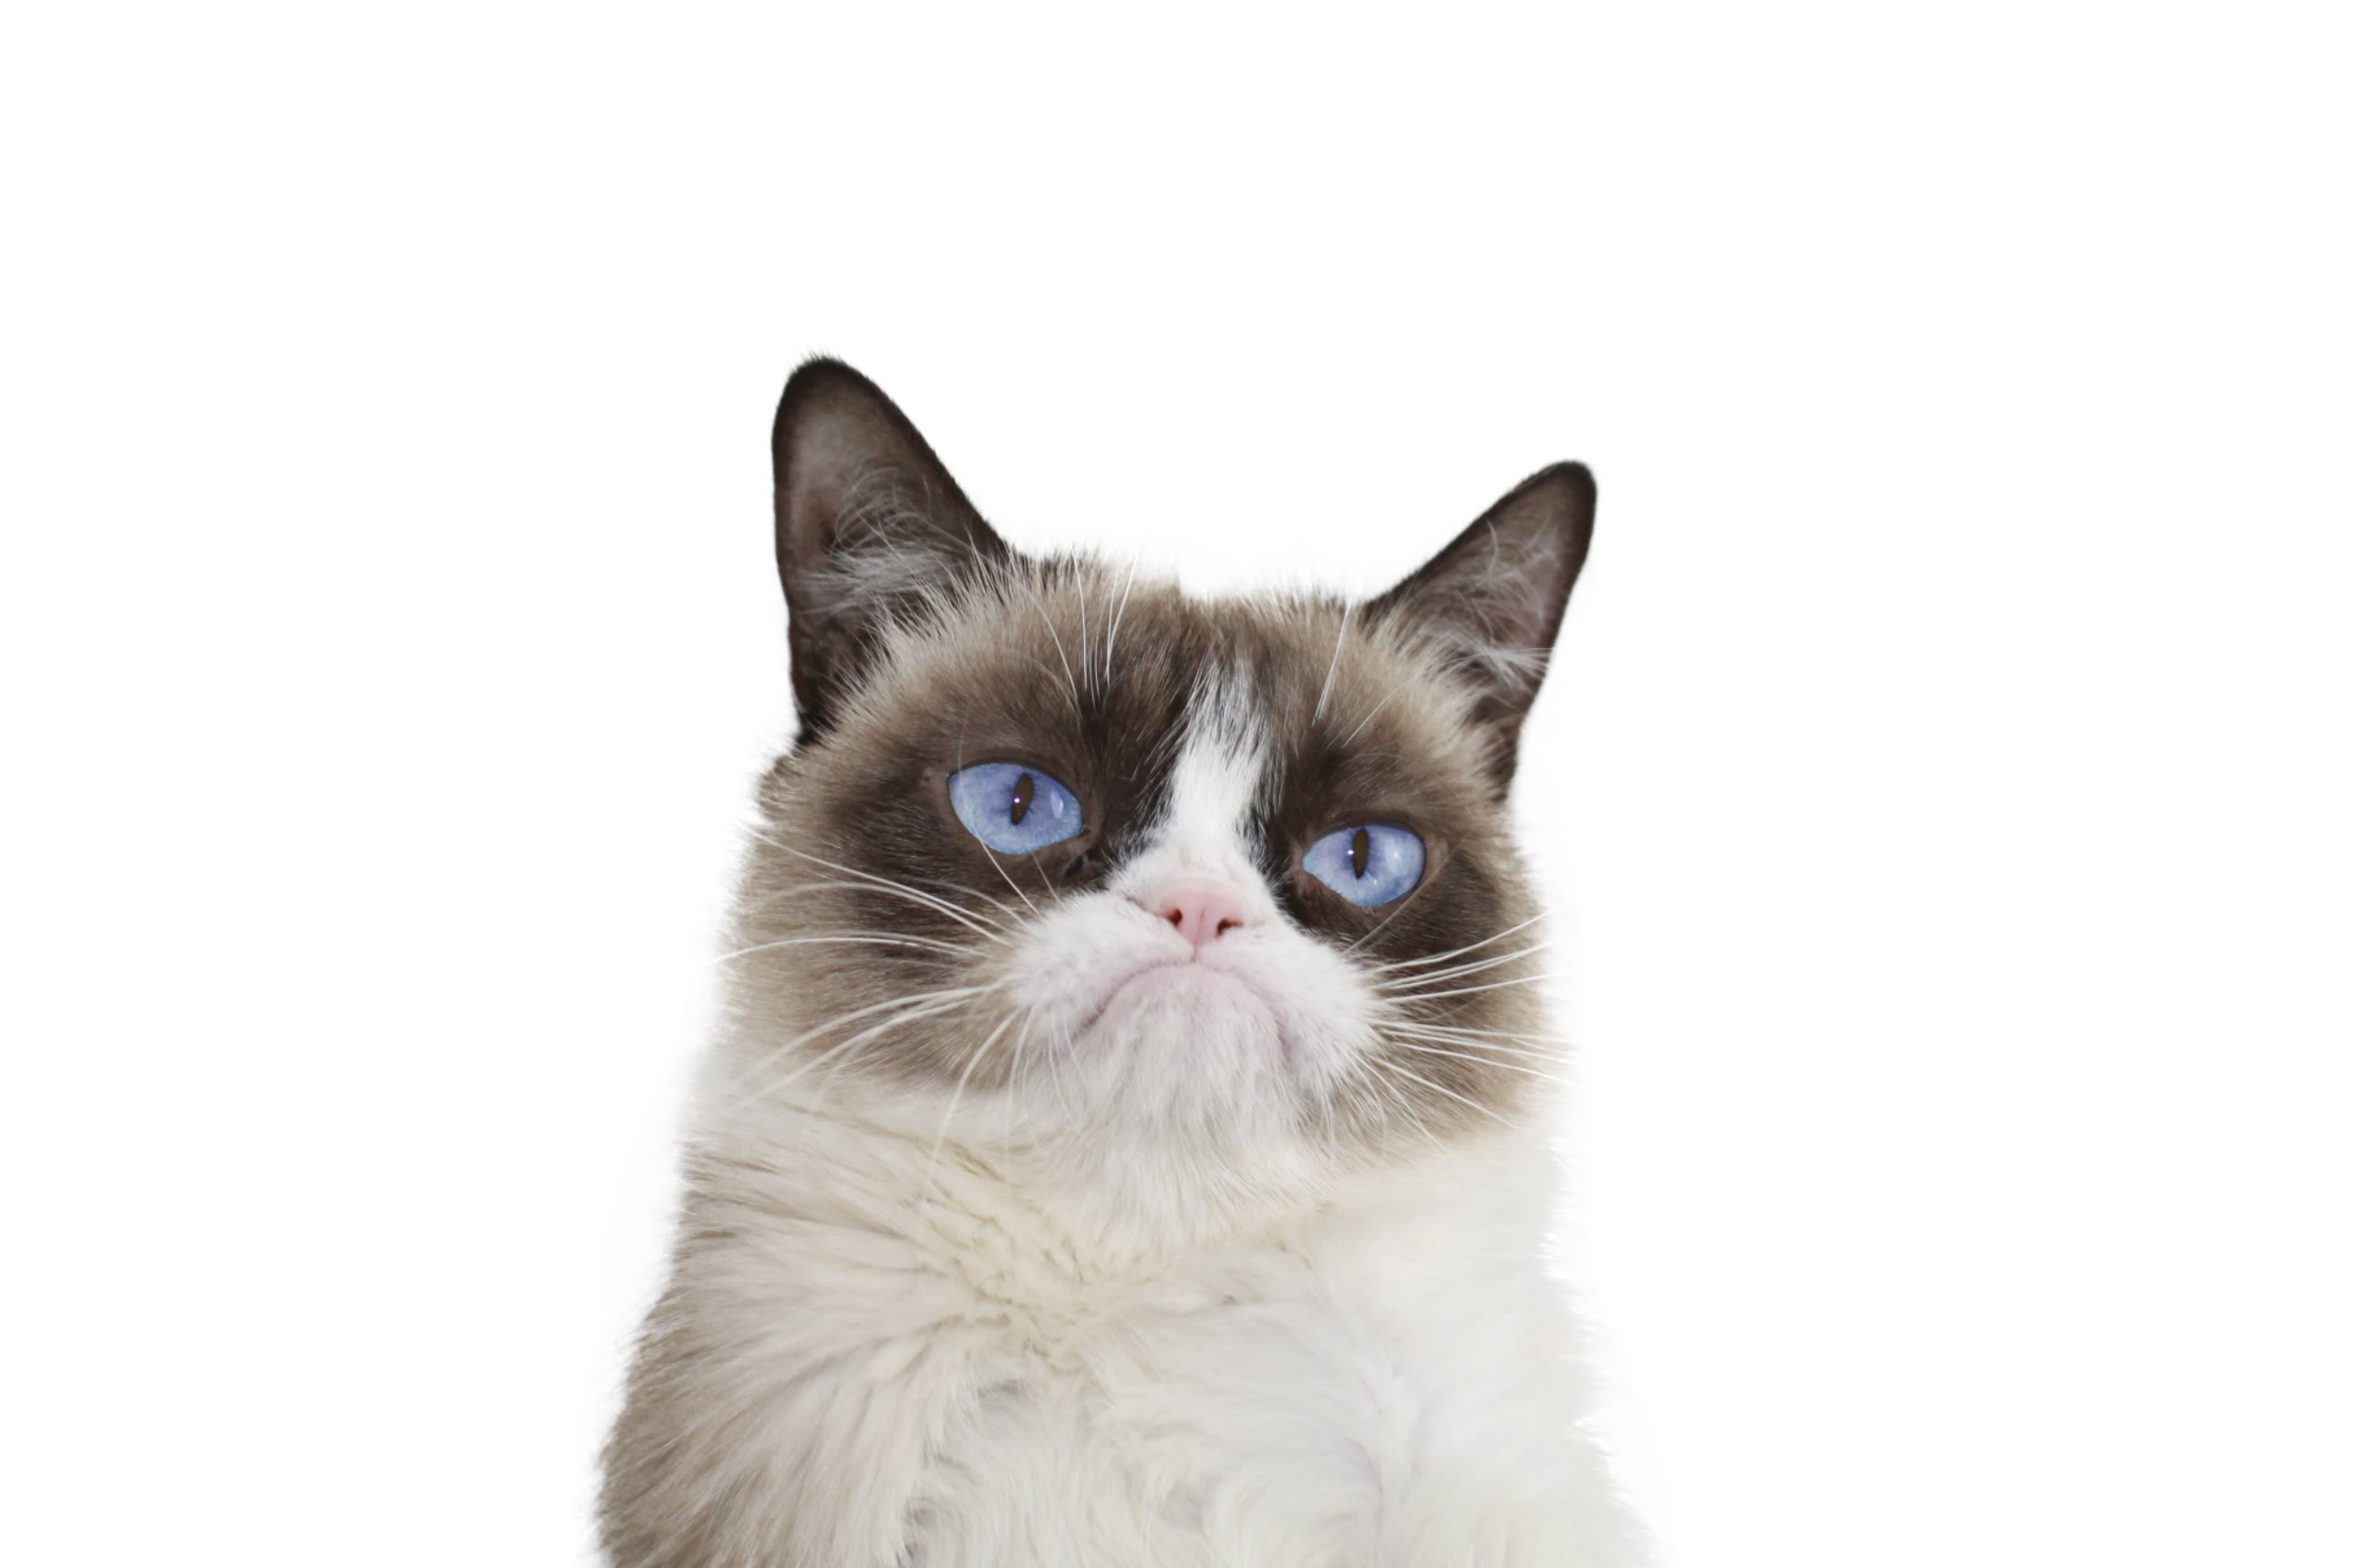 The Official Grumpy Cat added